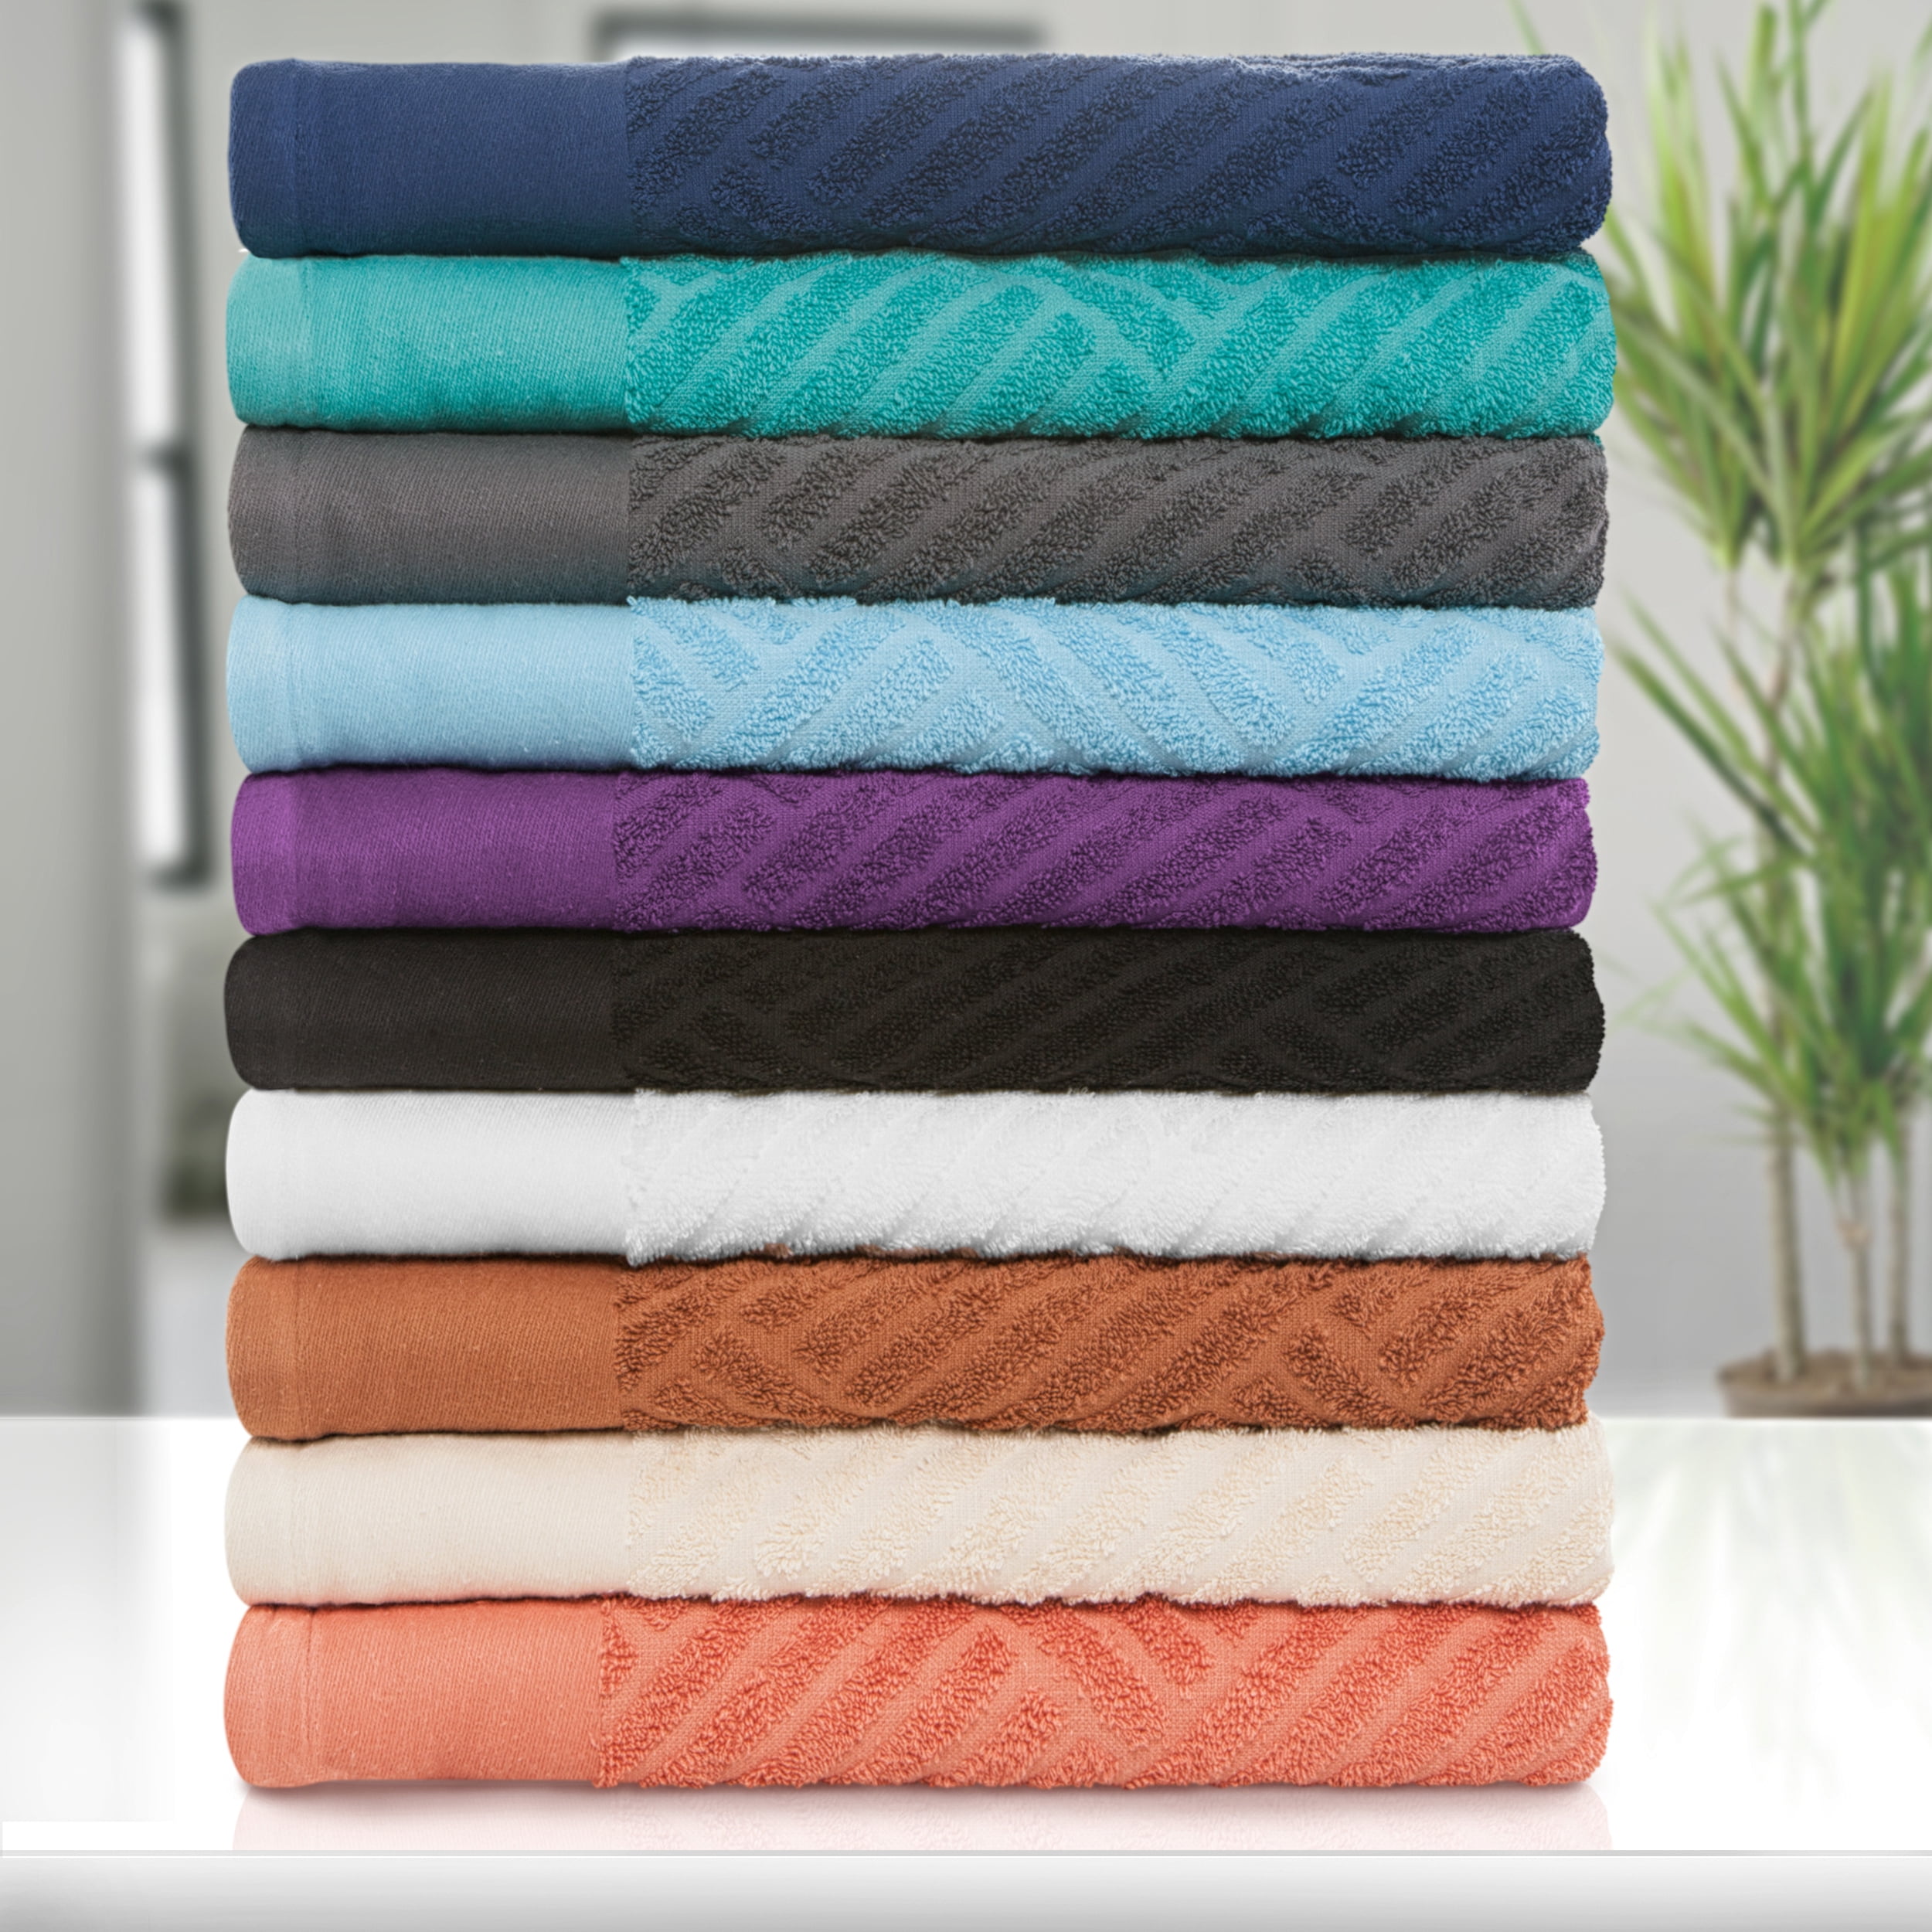 Linen towels 23.62x47.24 in for the bathroom. High quality, double-sided  weaving